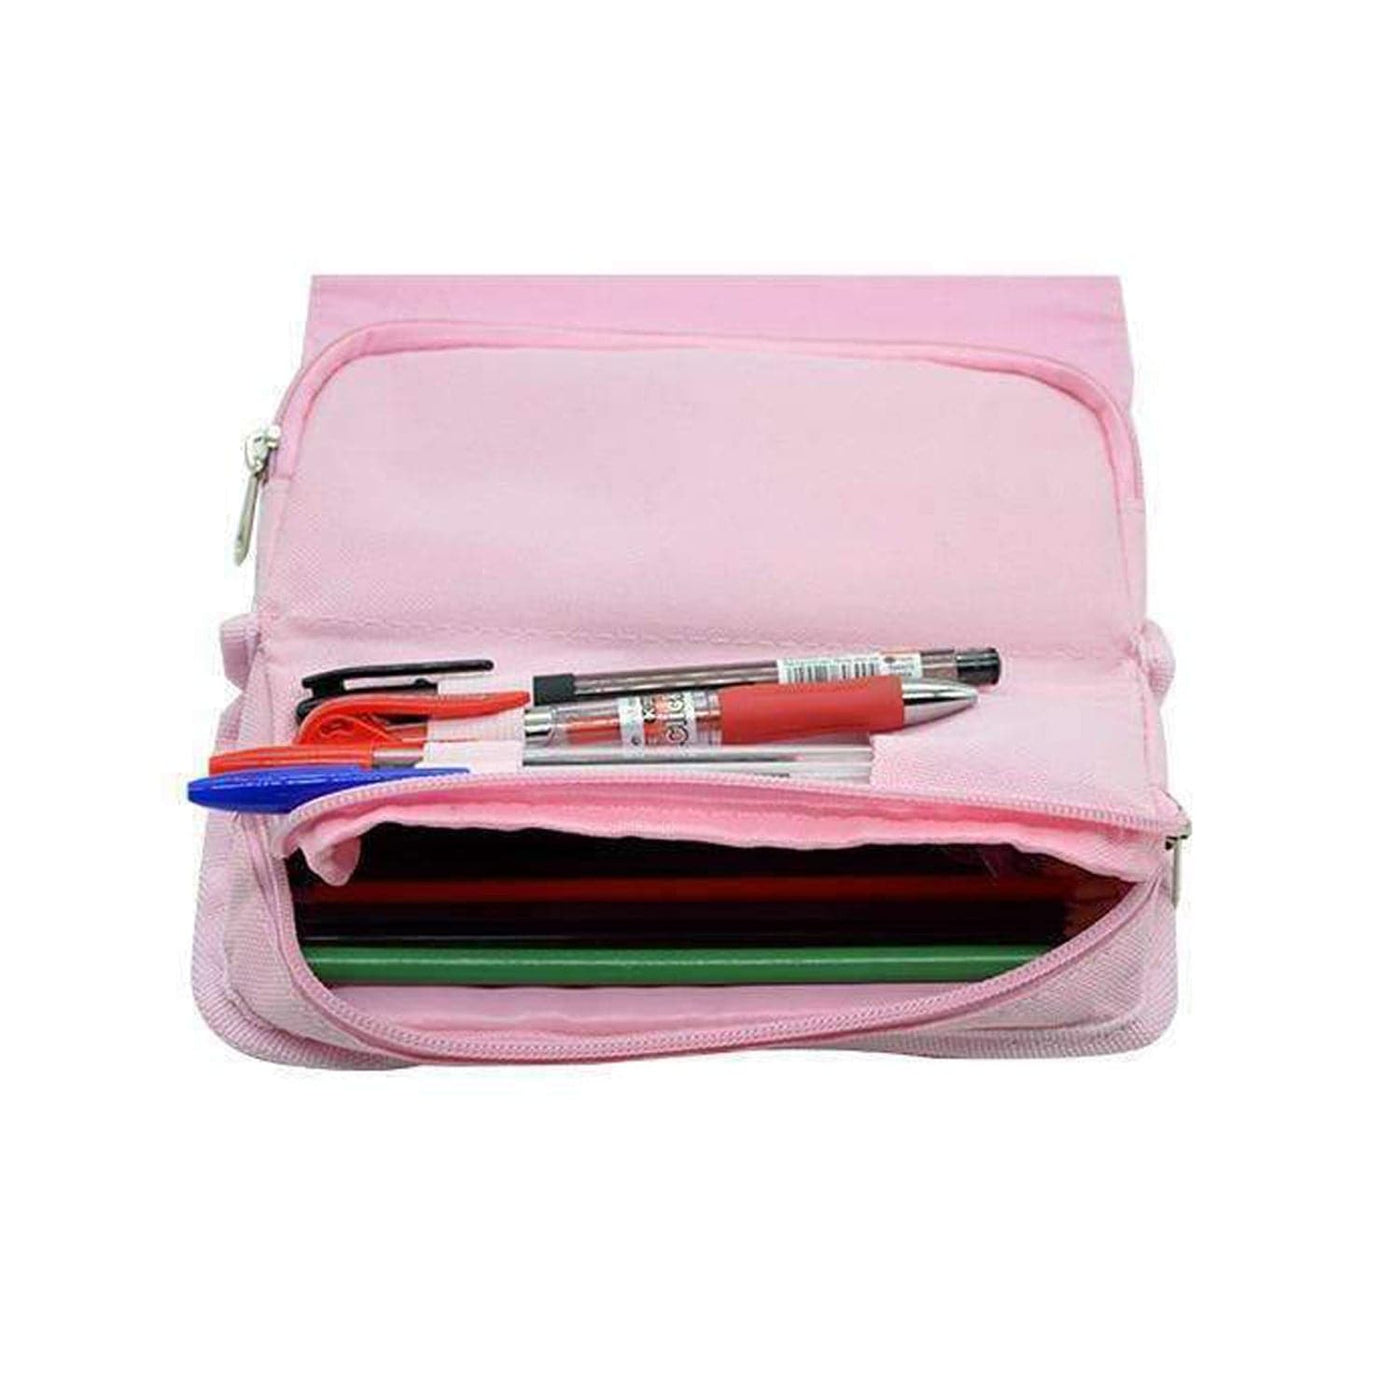 You Are The Best - Personalised Teachers Gift Pencil Case